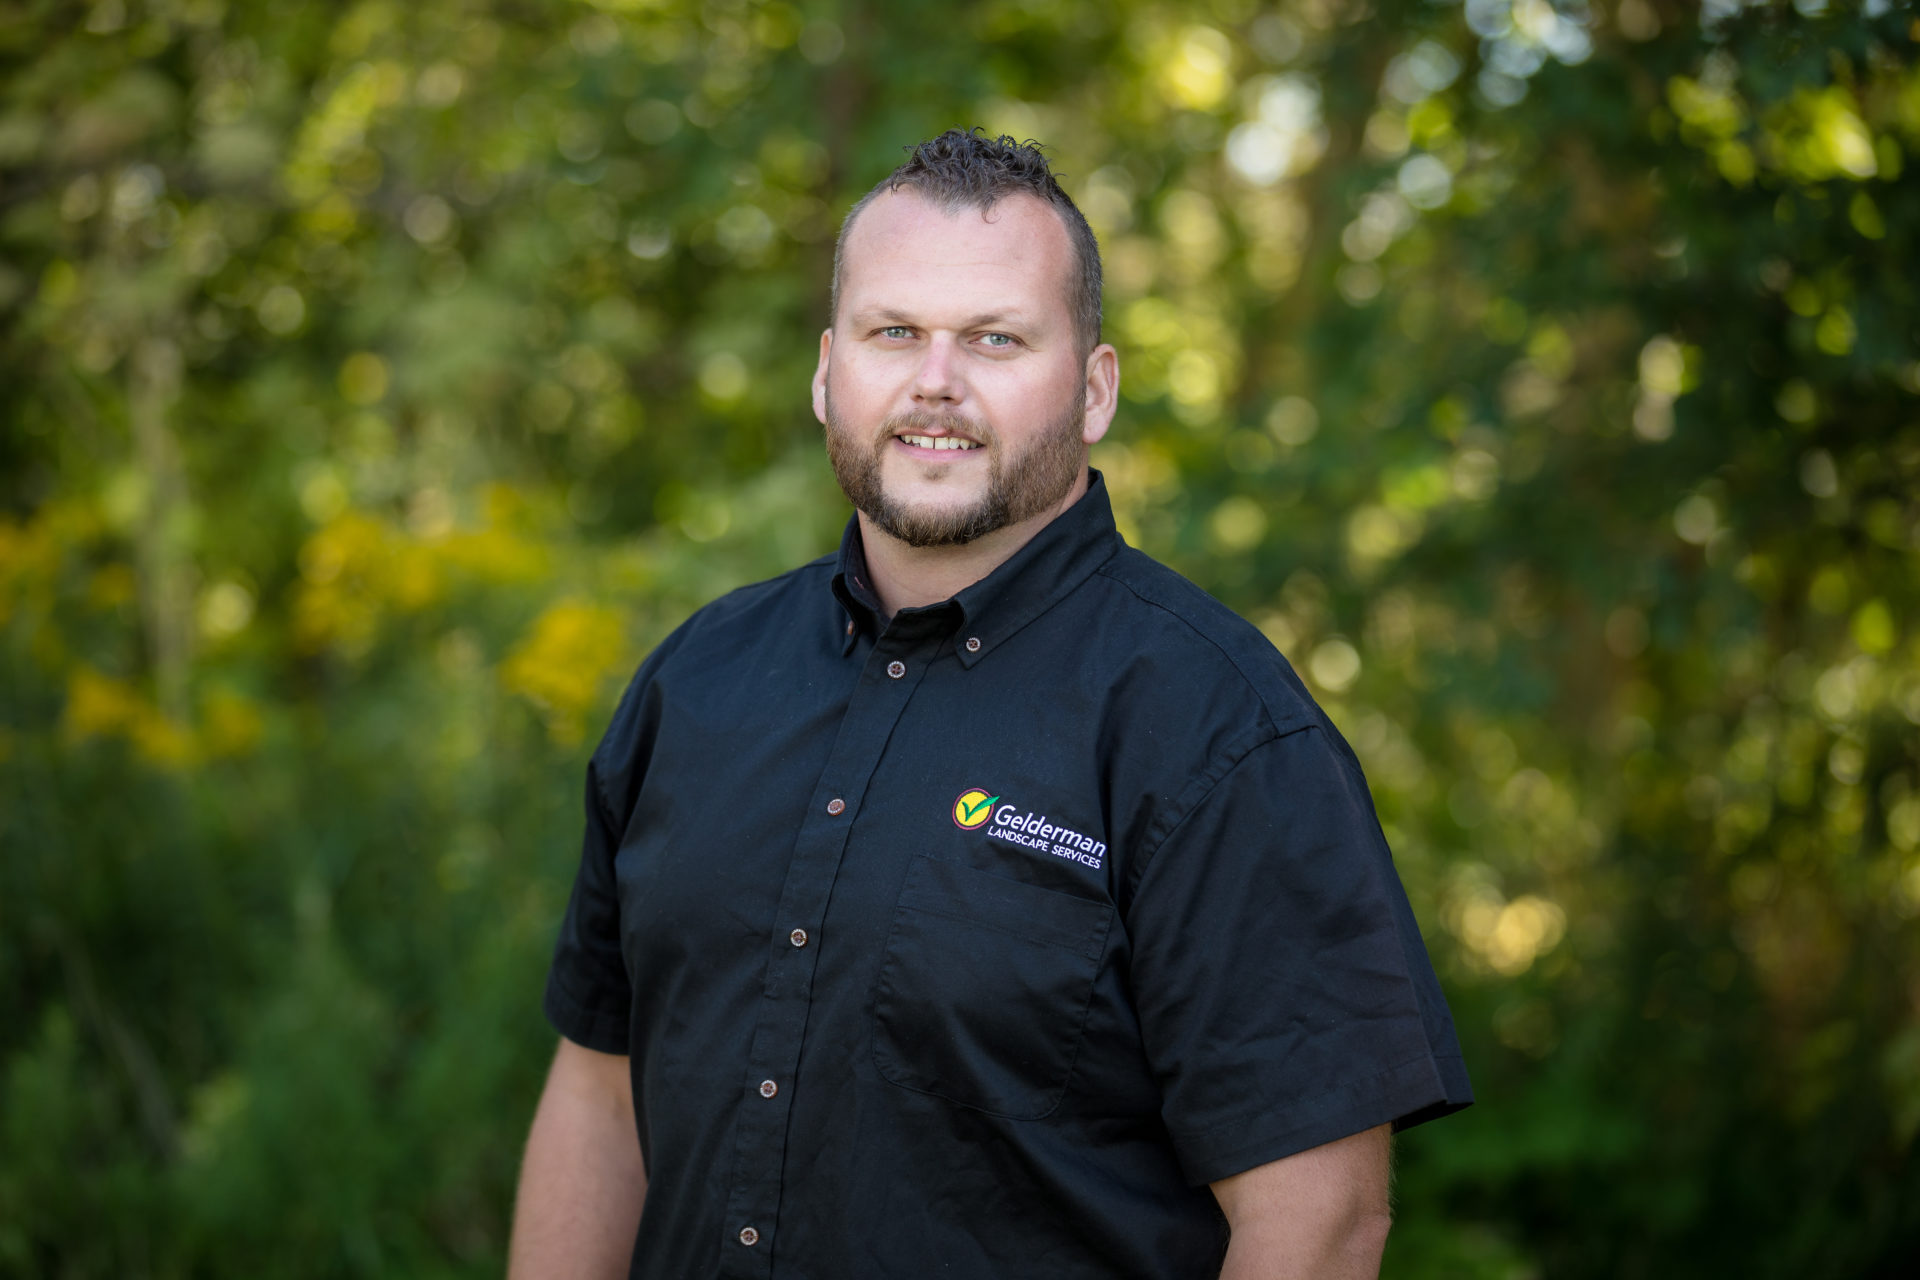 Mark Wilson joined the company and is now the current Waterdown Branch Manager.